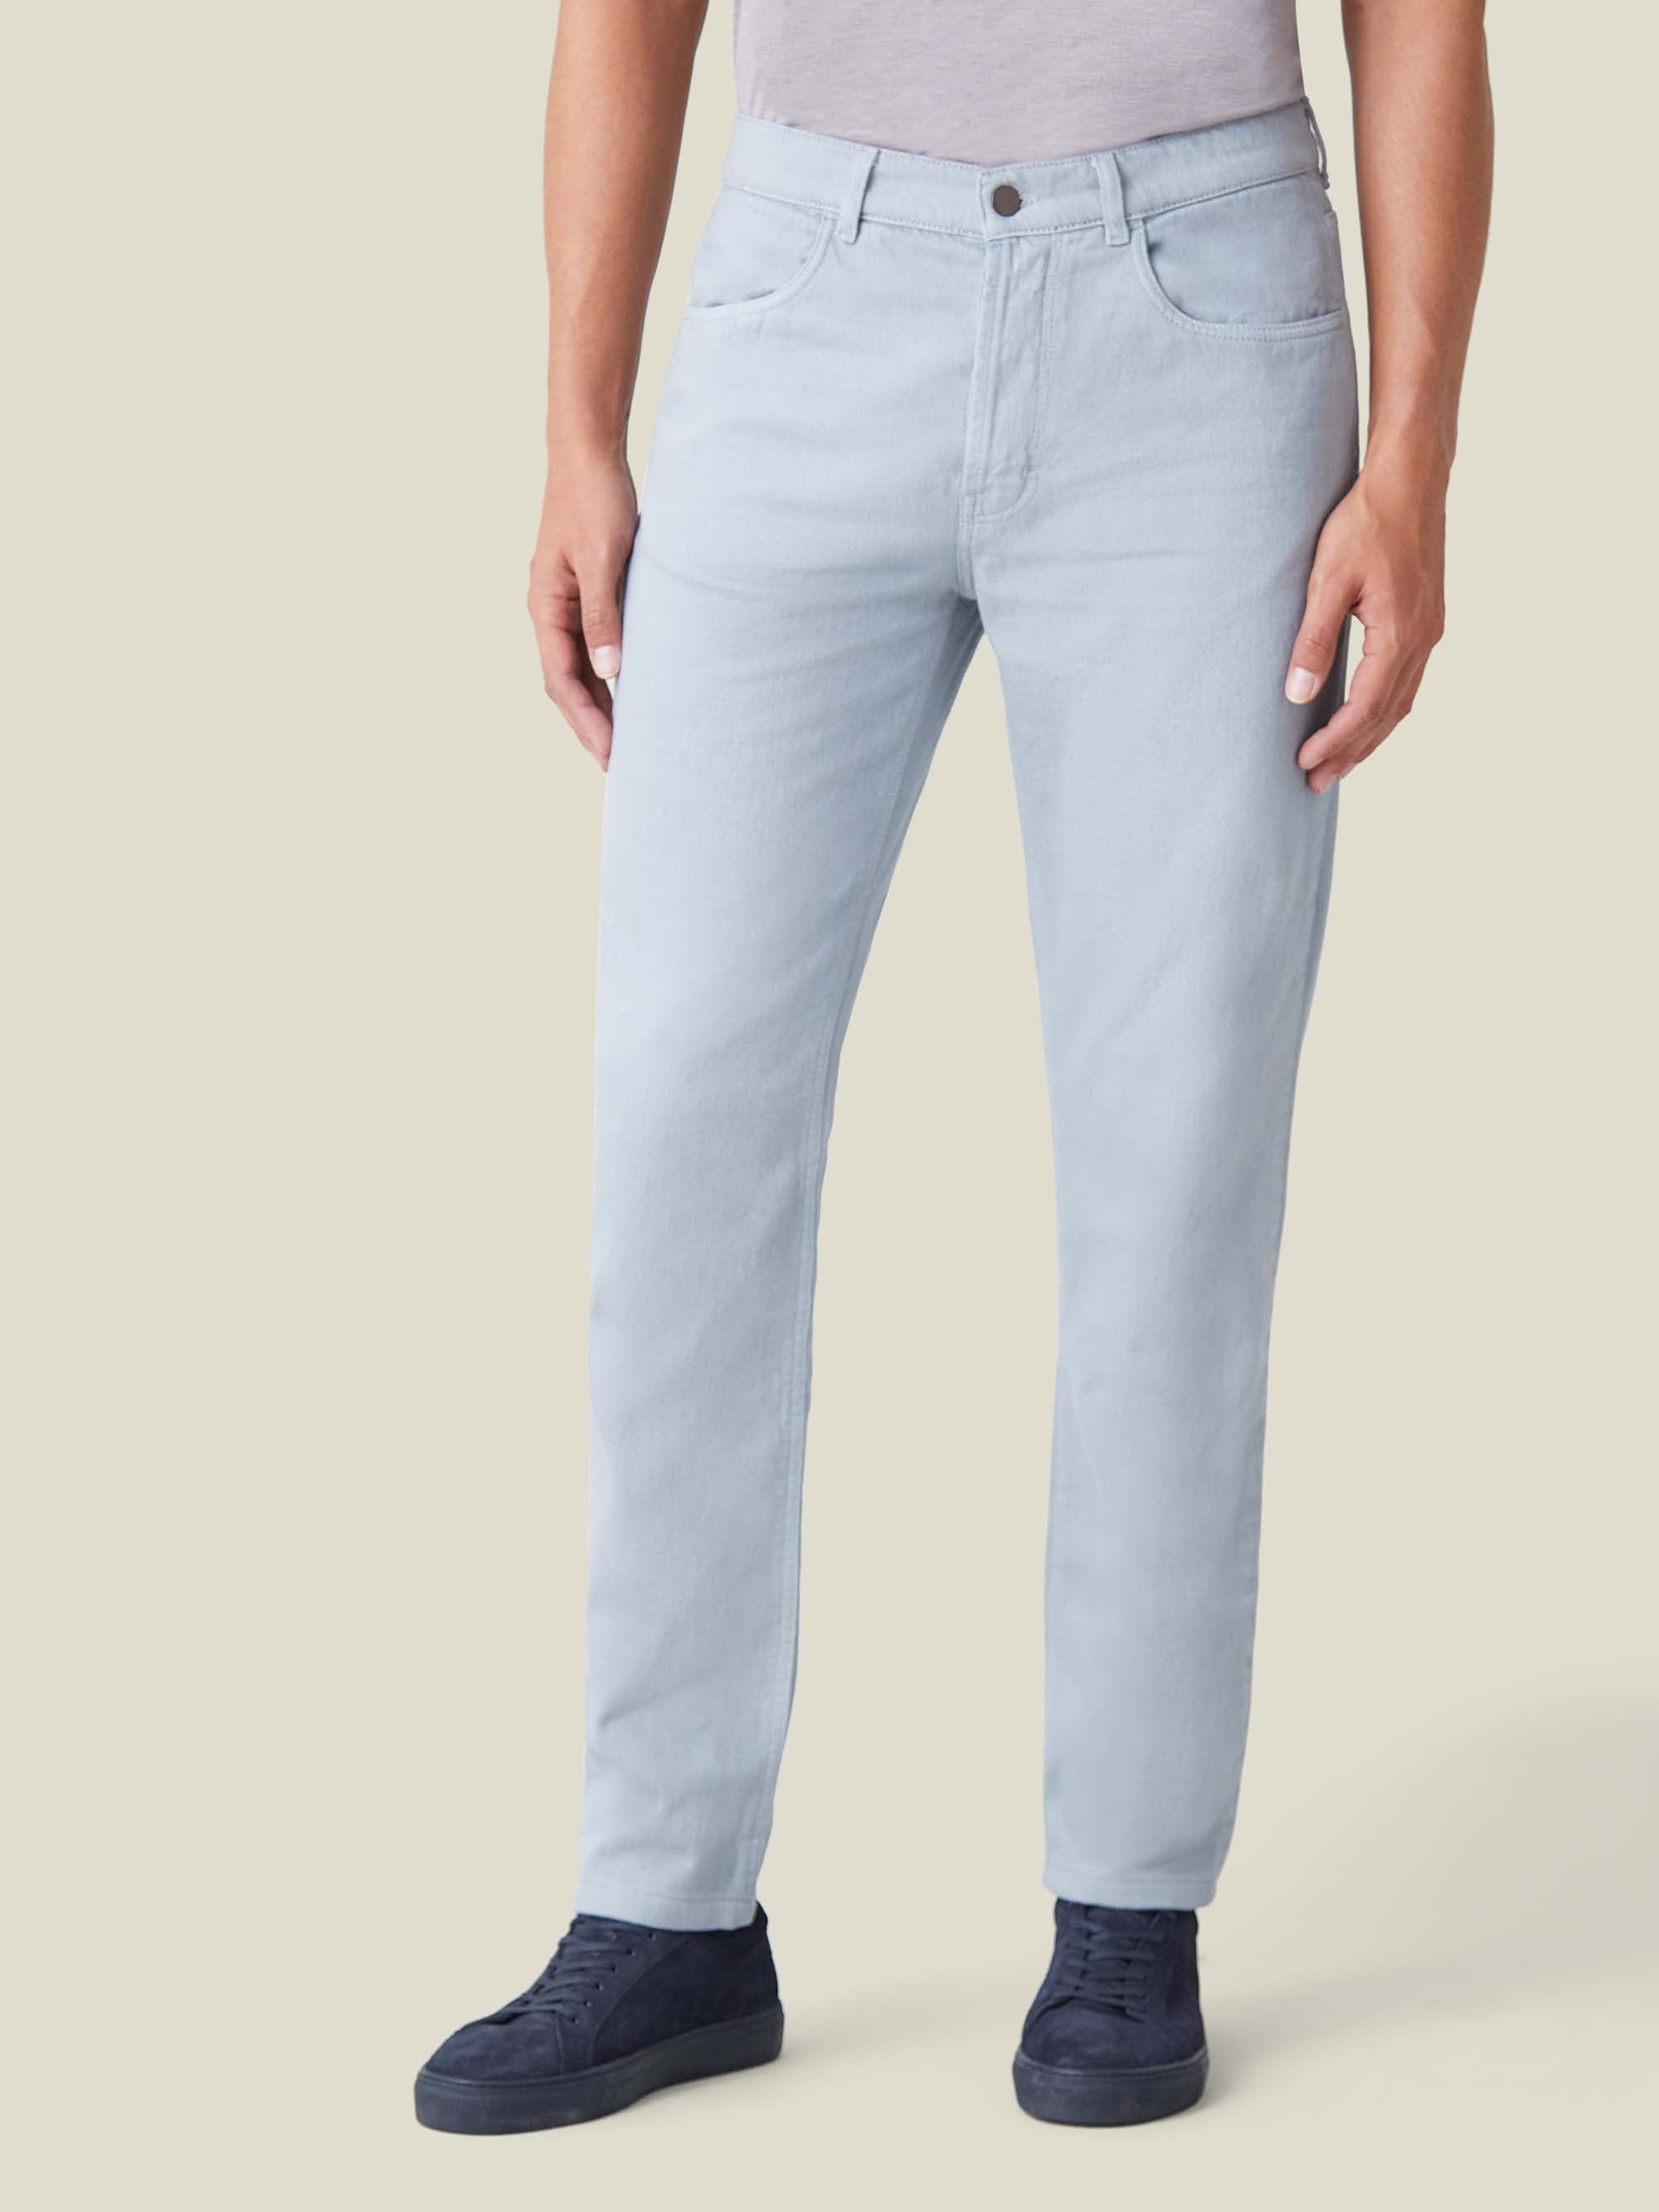 Light Grey Jeans product